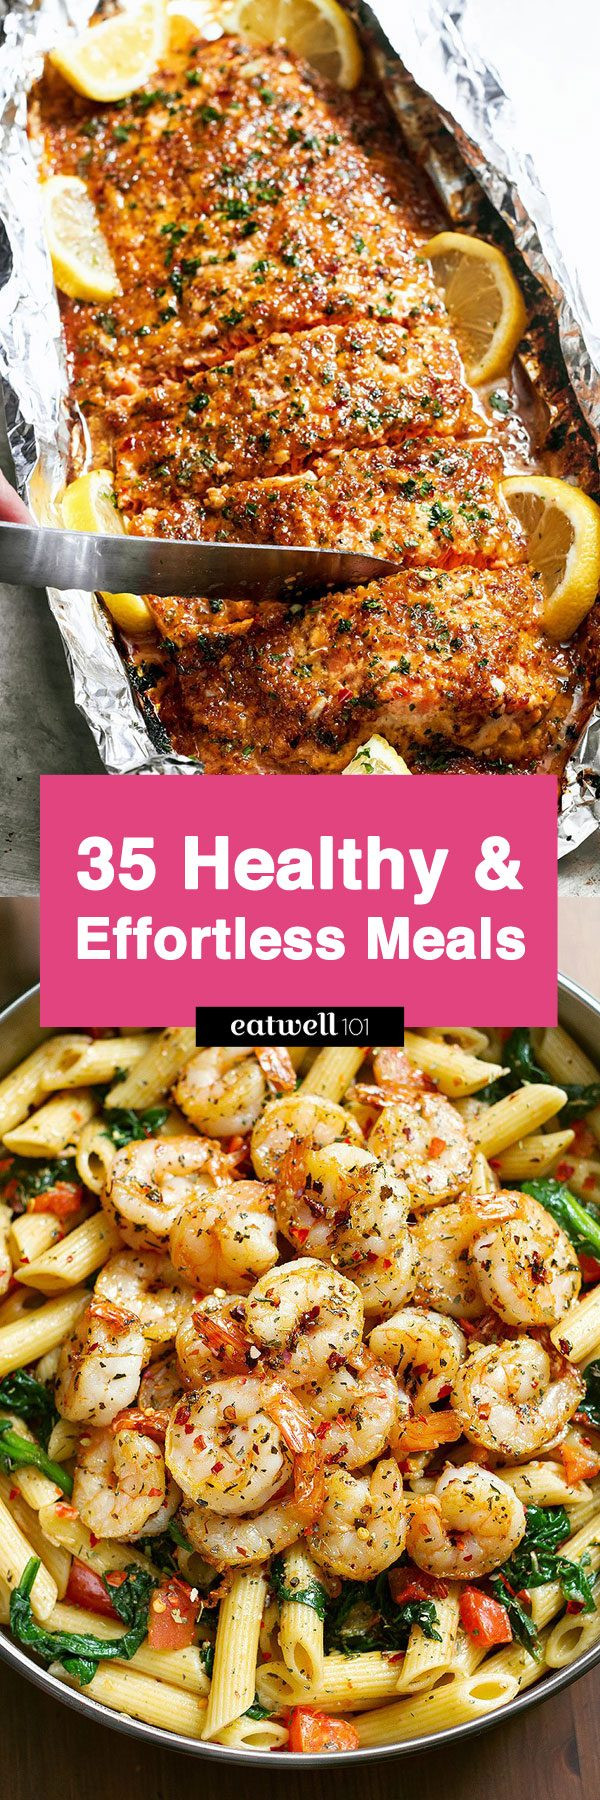 Simple Healthy Dinner Recipes
 Easy Healthy Dinner Ideas 46 Low Effort and Healthy